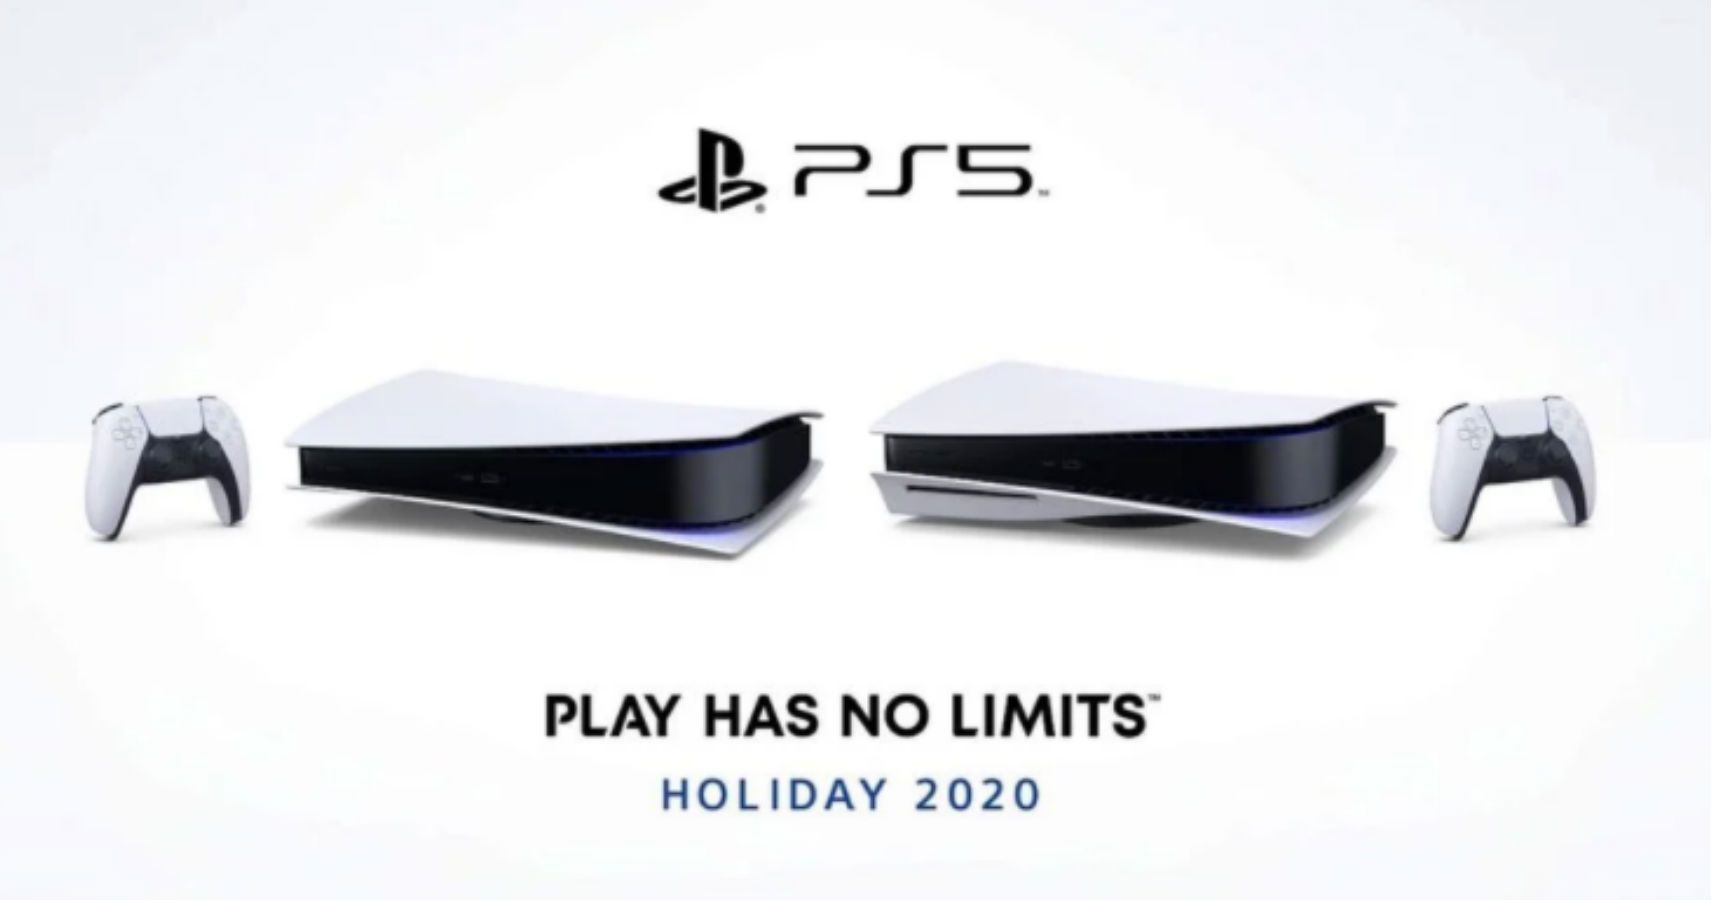 Theres A Big PS5 Announcement Coming Tomorrow According To Retailer pokemonwe.com